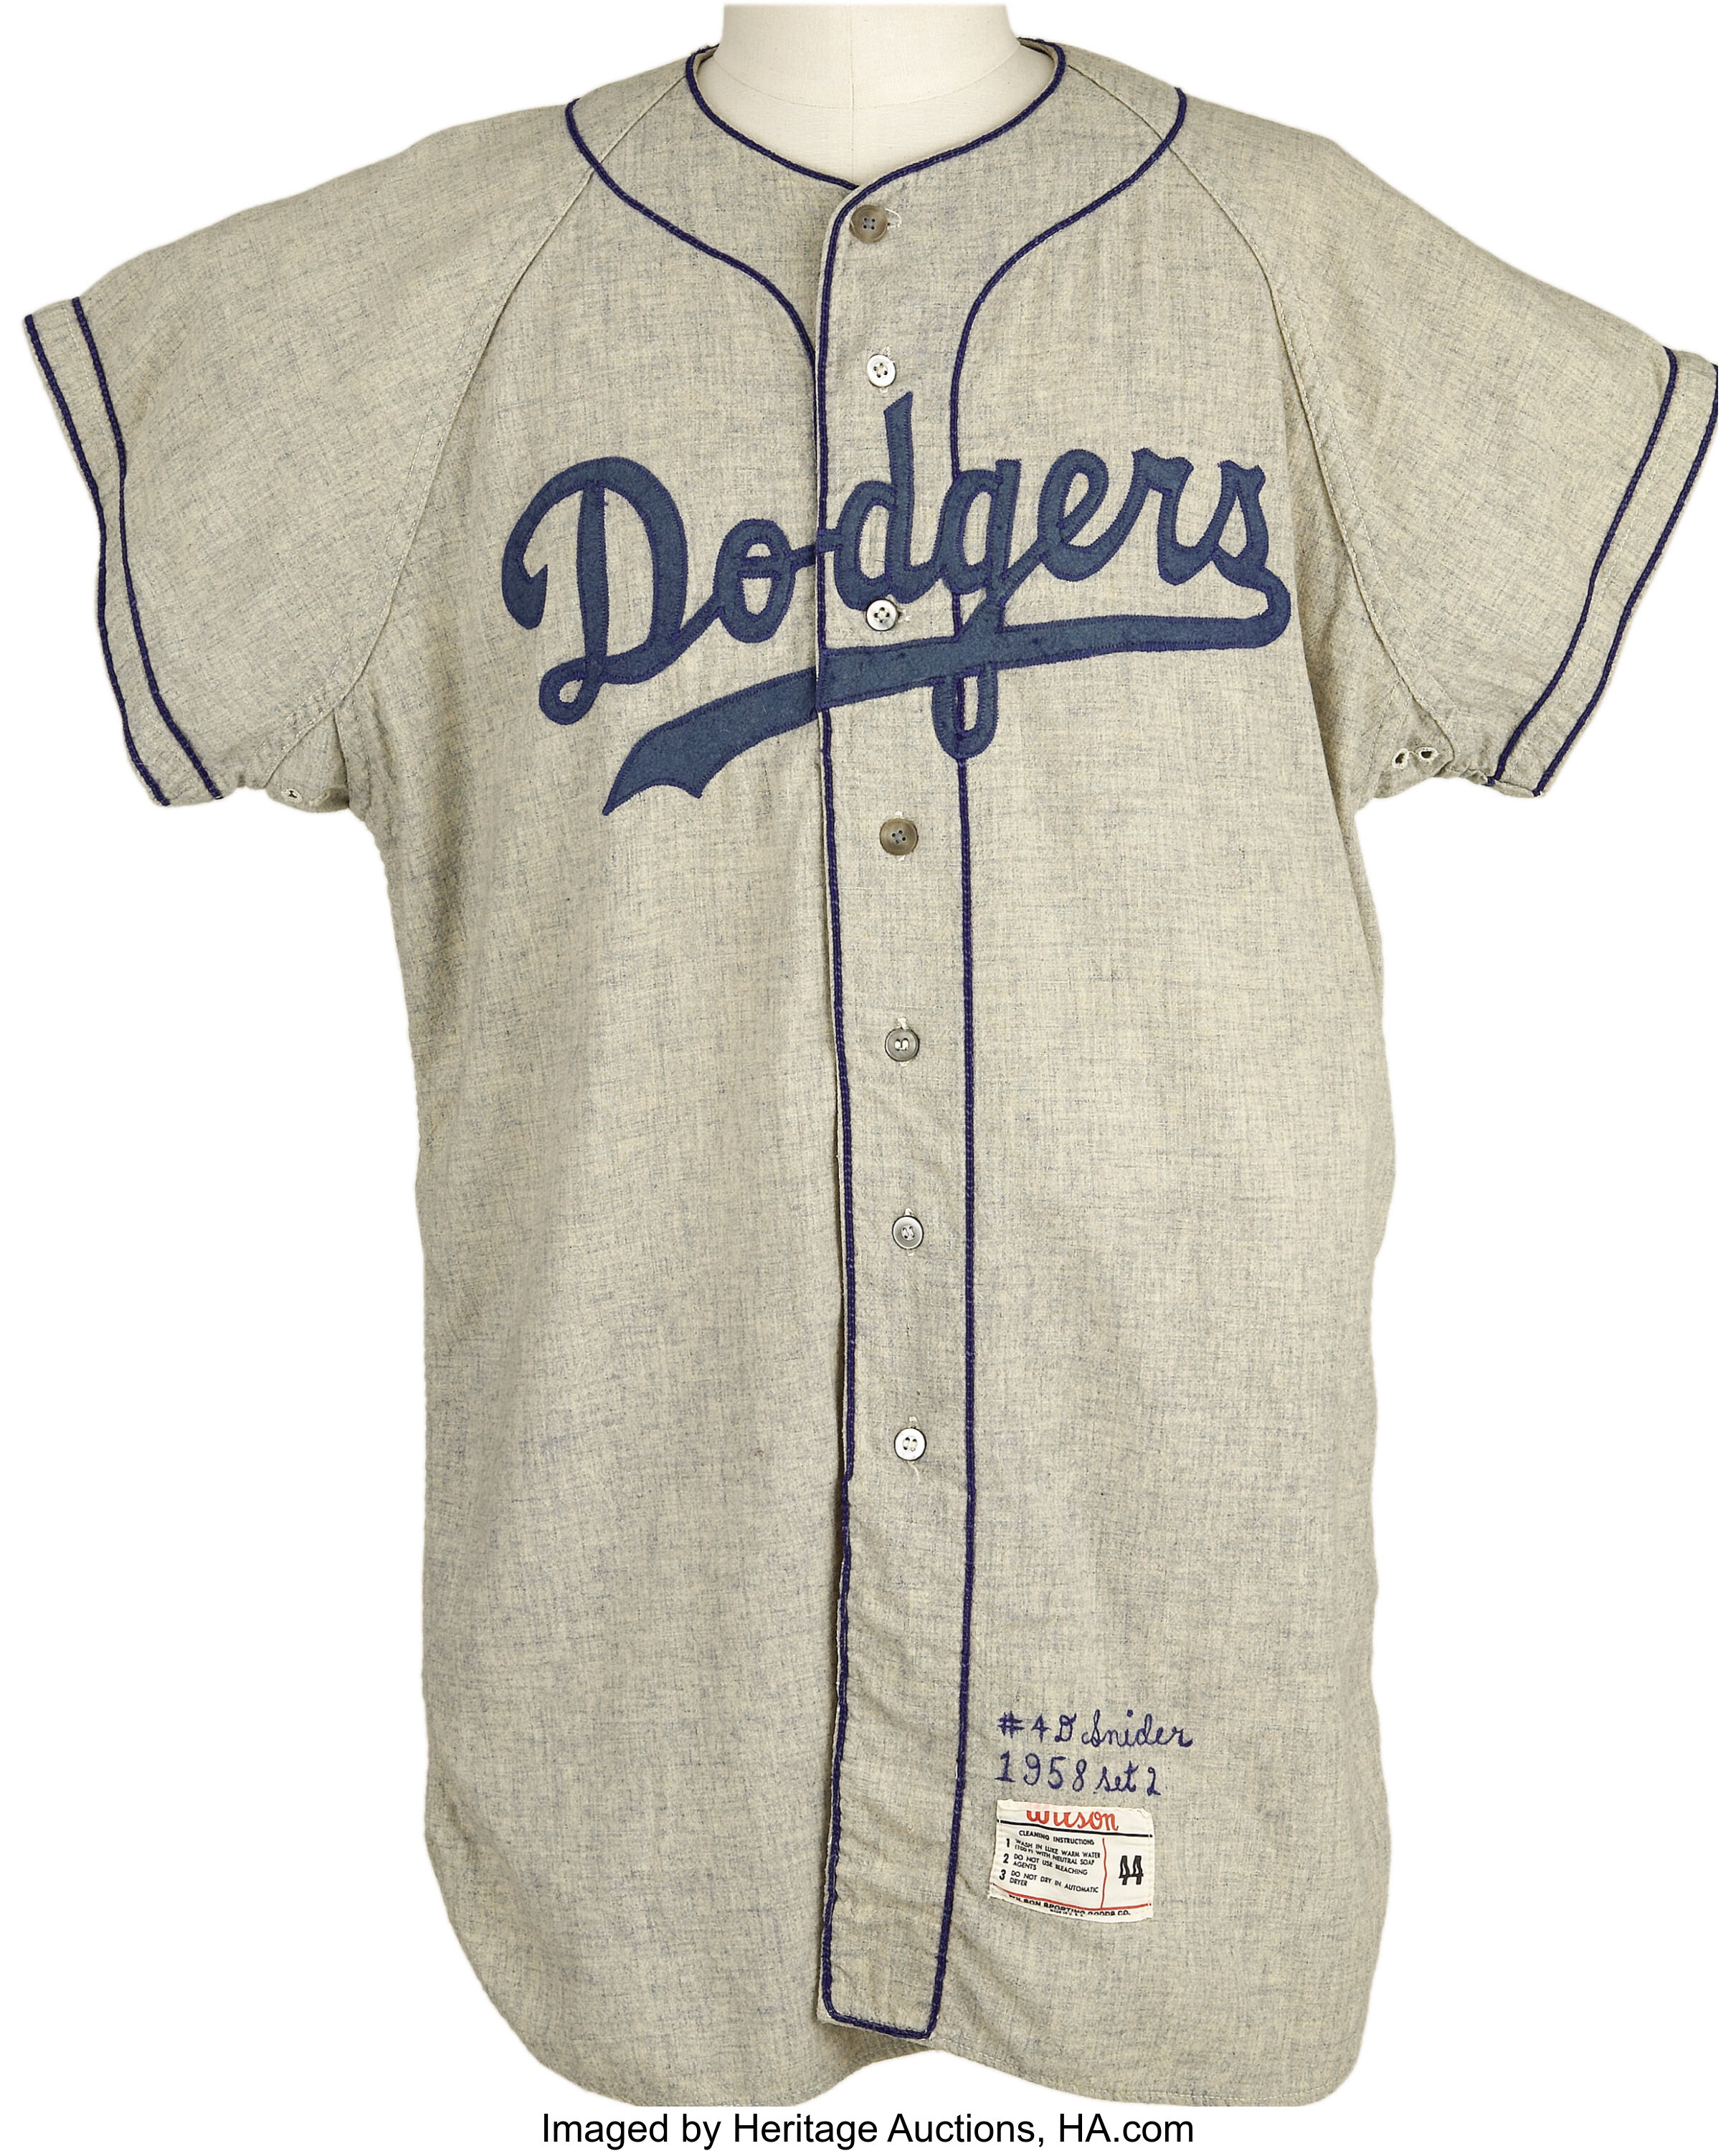 1958 Duke Snider Game Worn Jersey. We wept, the Hall of Fame, Lot #19668